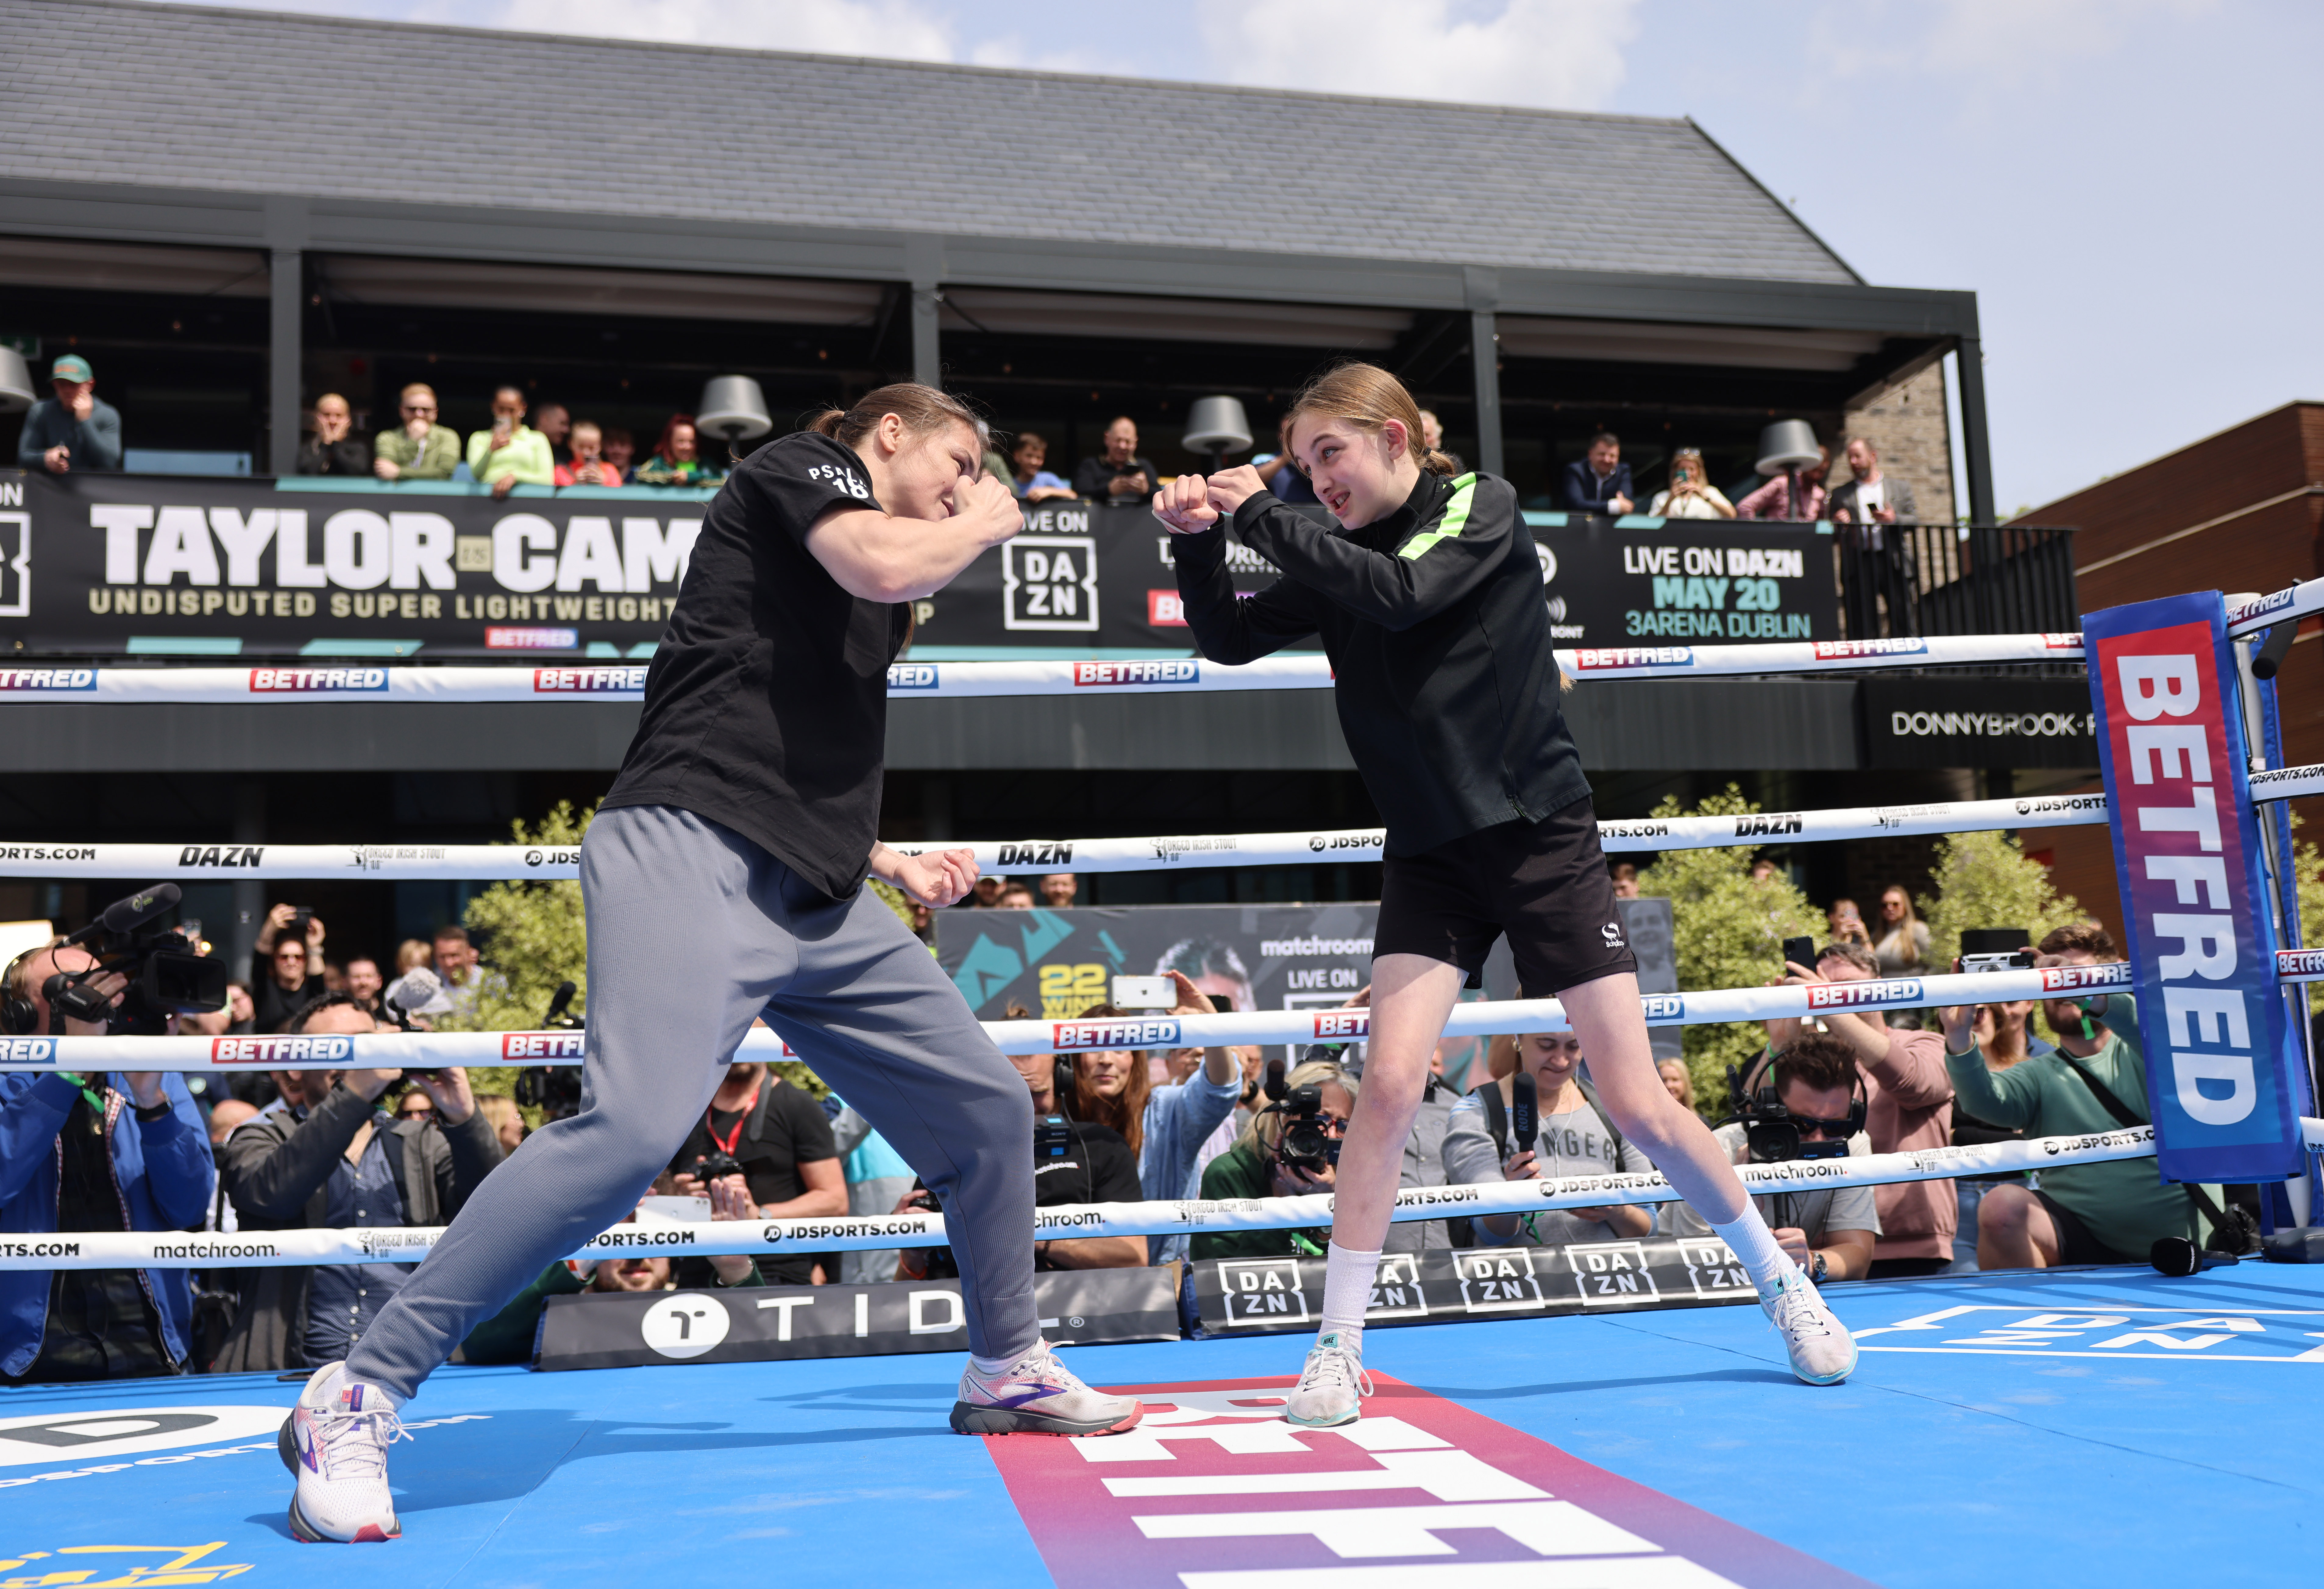 Katie Taylor brings Dundrum Town Centre to a standstill with public workout 